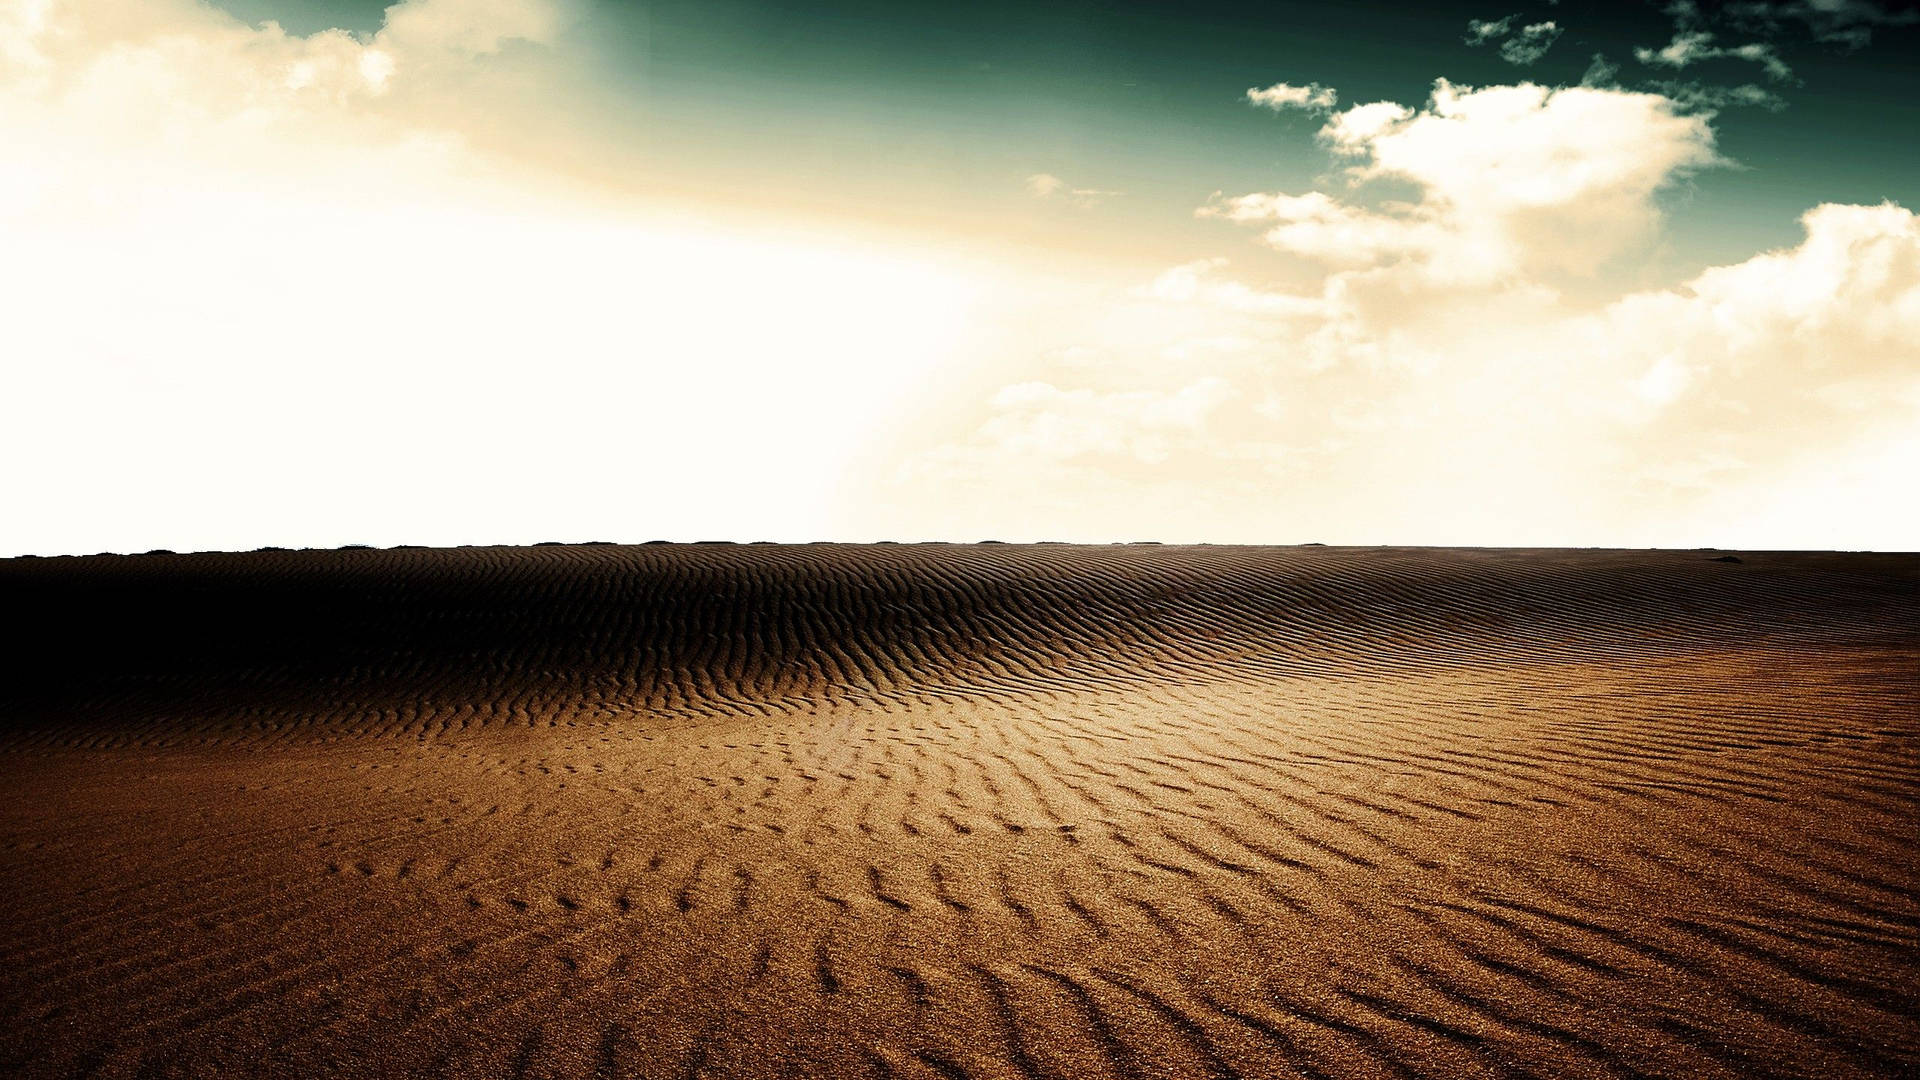 "A peaceful desert landscape with stripes of sand and a cloudy sky" Wallpaper